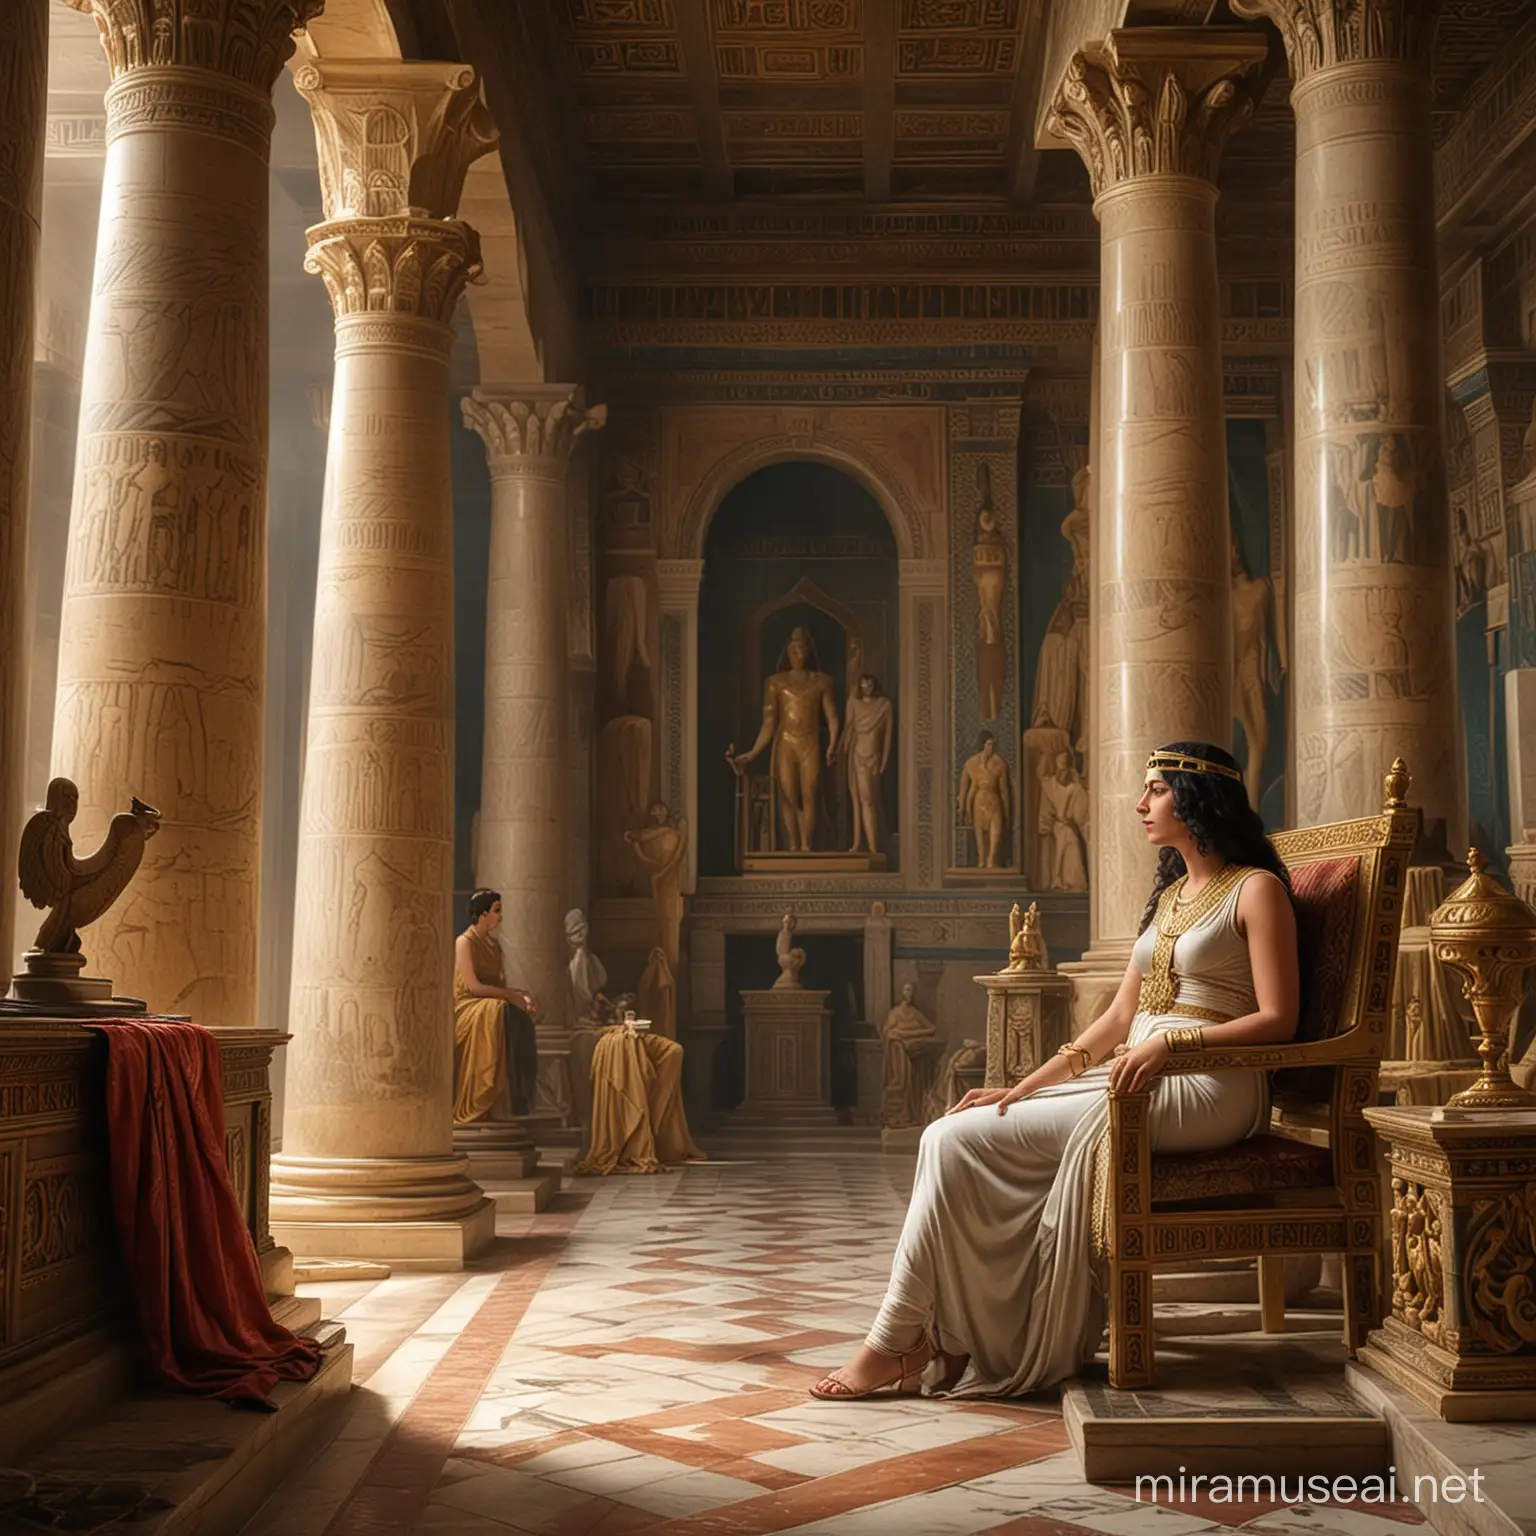 Queen Cleopatra Strategizing in Opulent Ancient Alexandria Palace